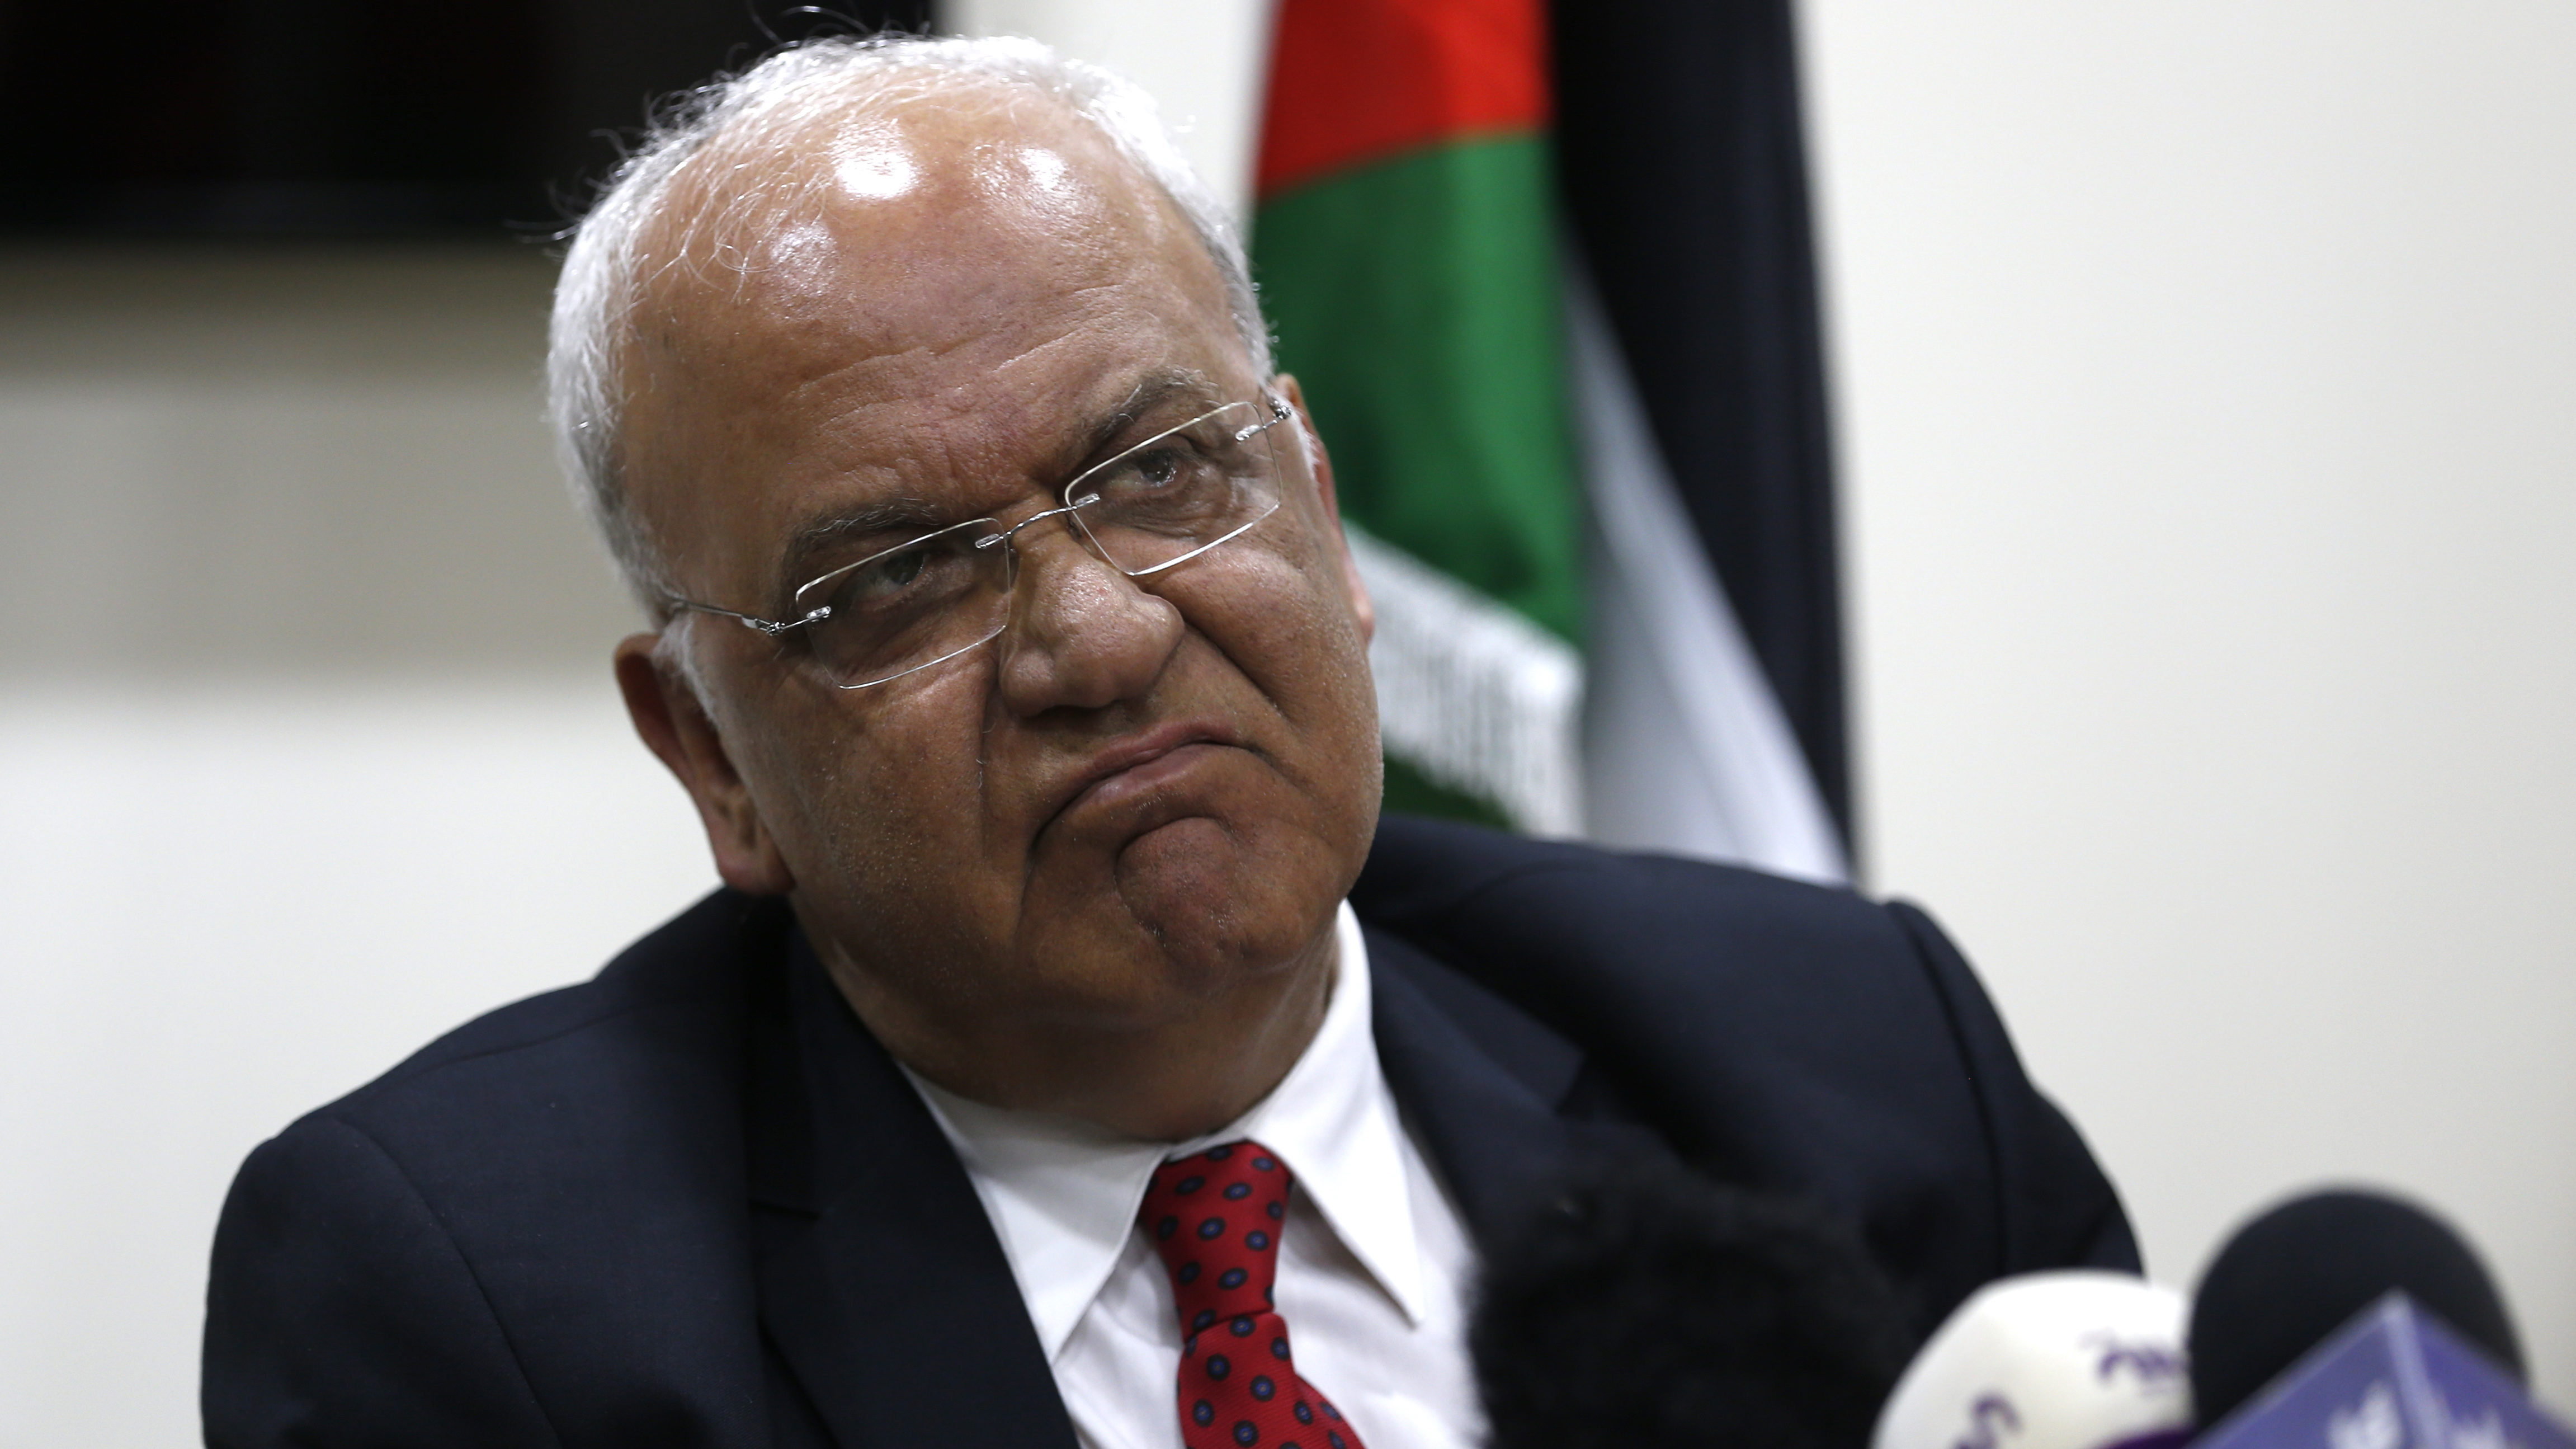 What Will Prof. Saeb Erekat Teach His Students?